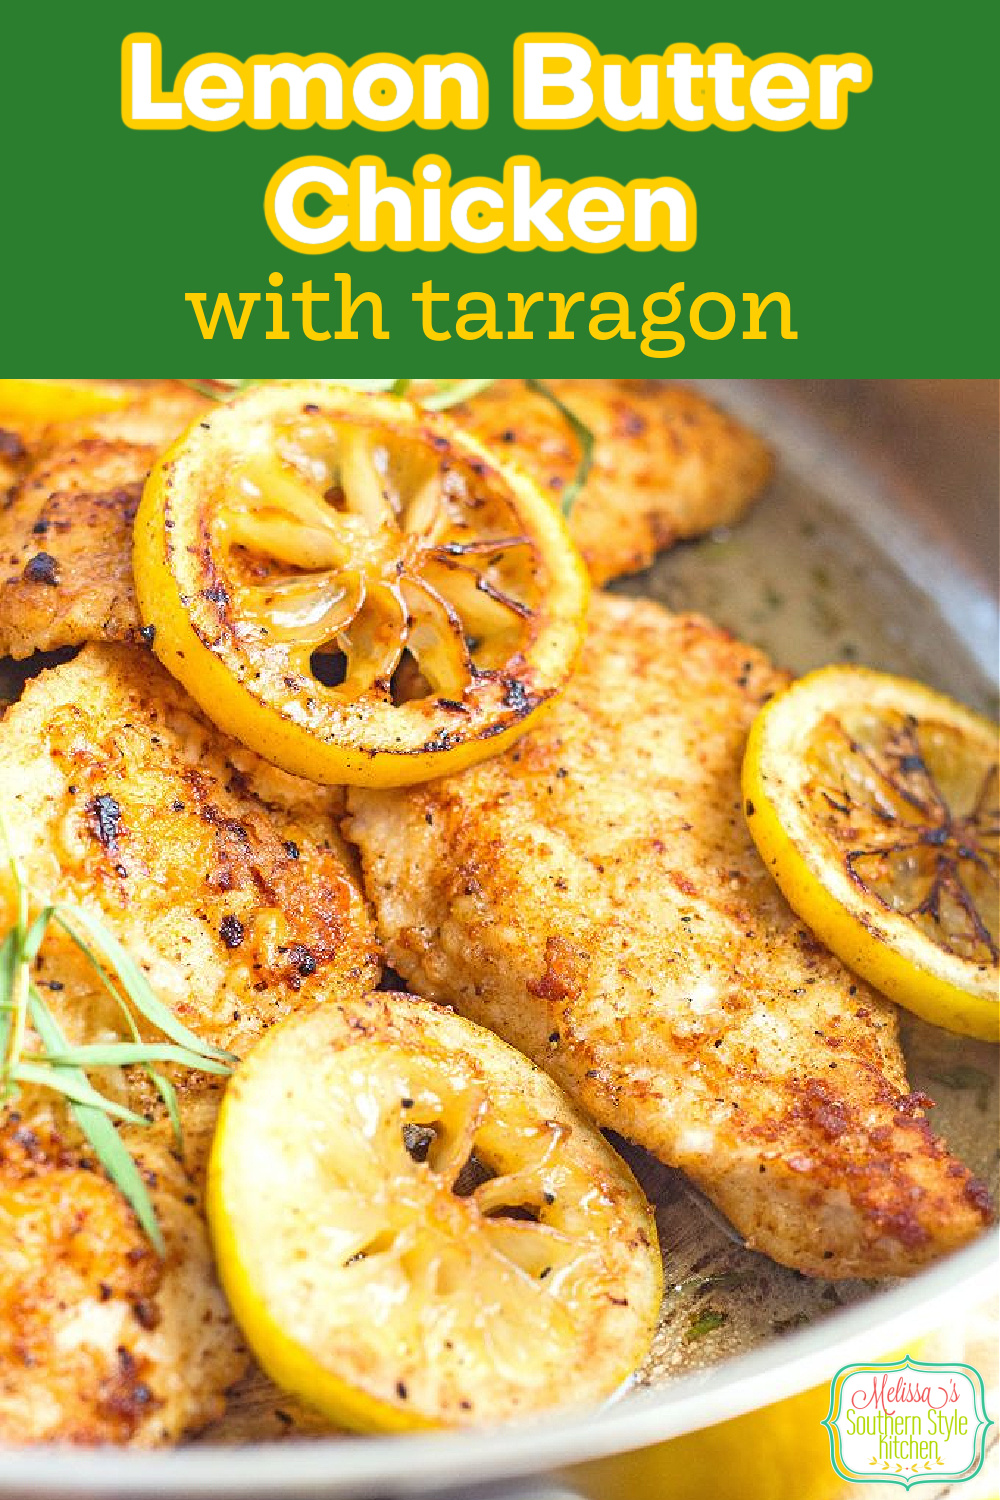 Serve this skillet Lemon Butter Chicken with Tarragon with rice or pasta and dinner is ready in 30 minutes #lemonbutterchicken #easychickenbreastrecipes #chickenrecipes #butterchicken #tarragonchicken #dinner #supper #easyrecipes #southernrecipes #lowcarb #ketorecipes